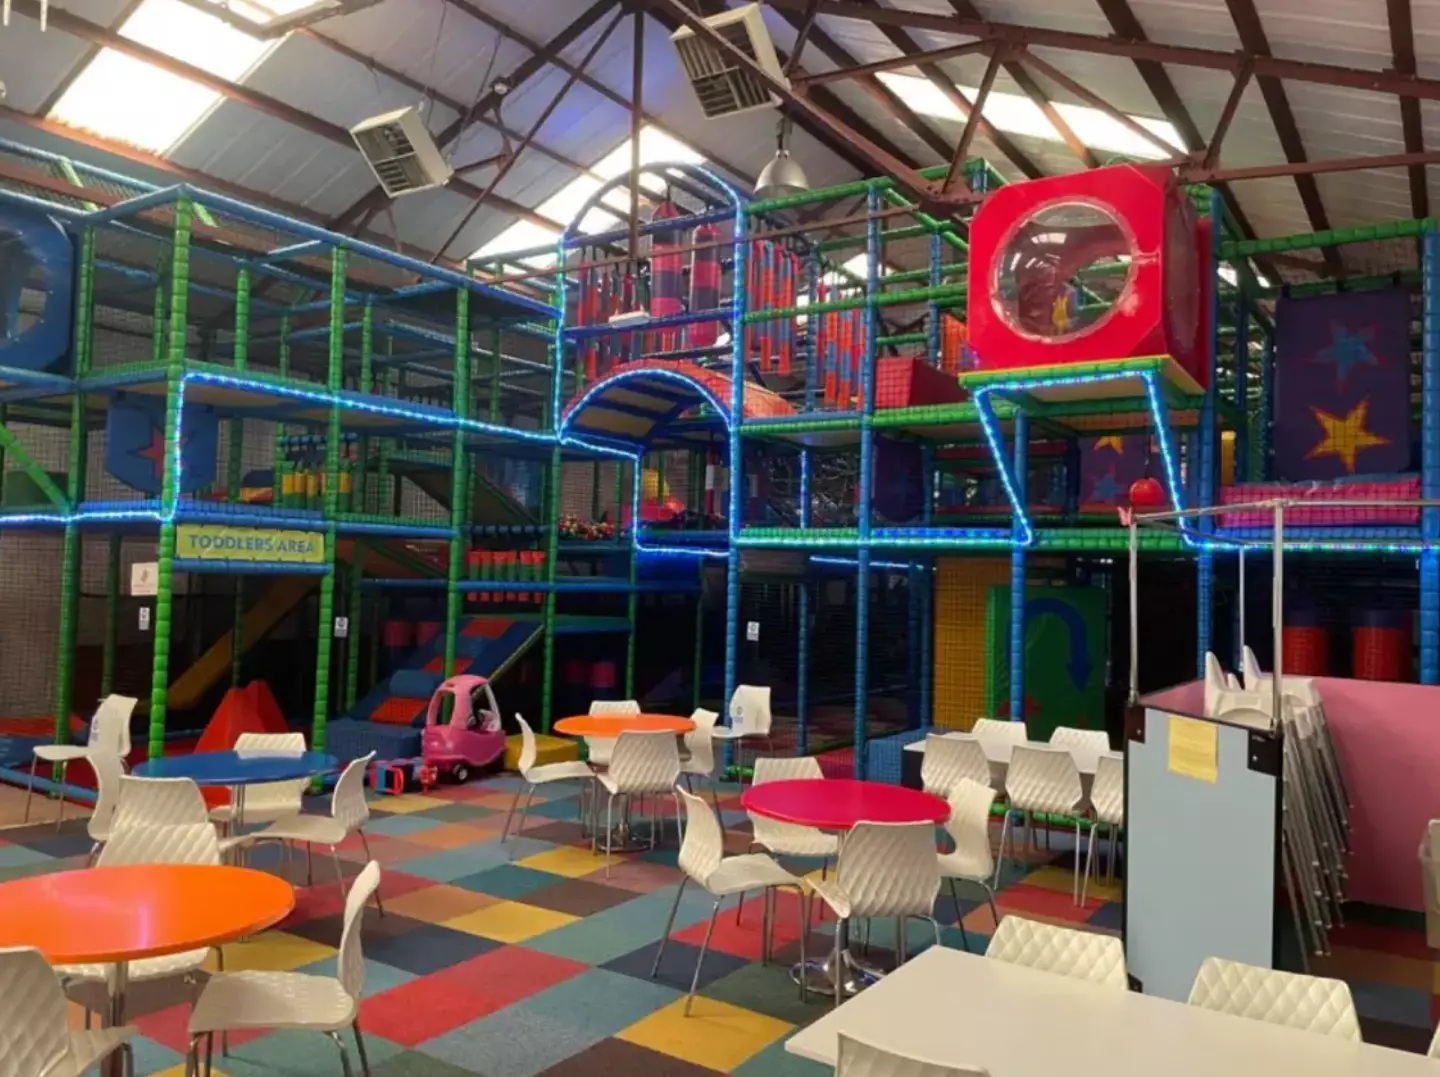 The children's play area hit out at the 'irresponsible' parents online. Credit Facebook/Tumbles Play Place